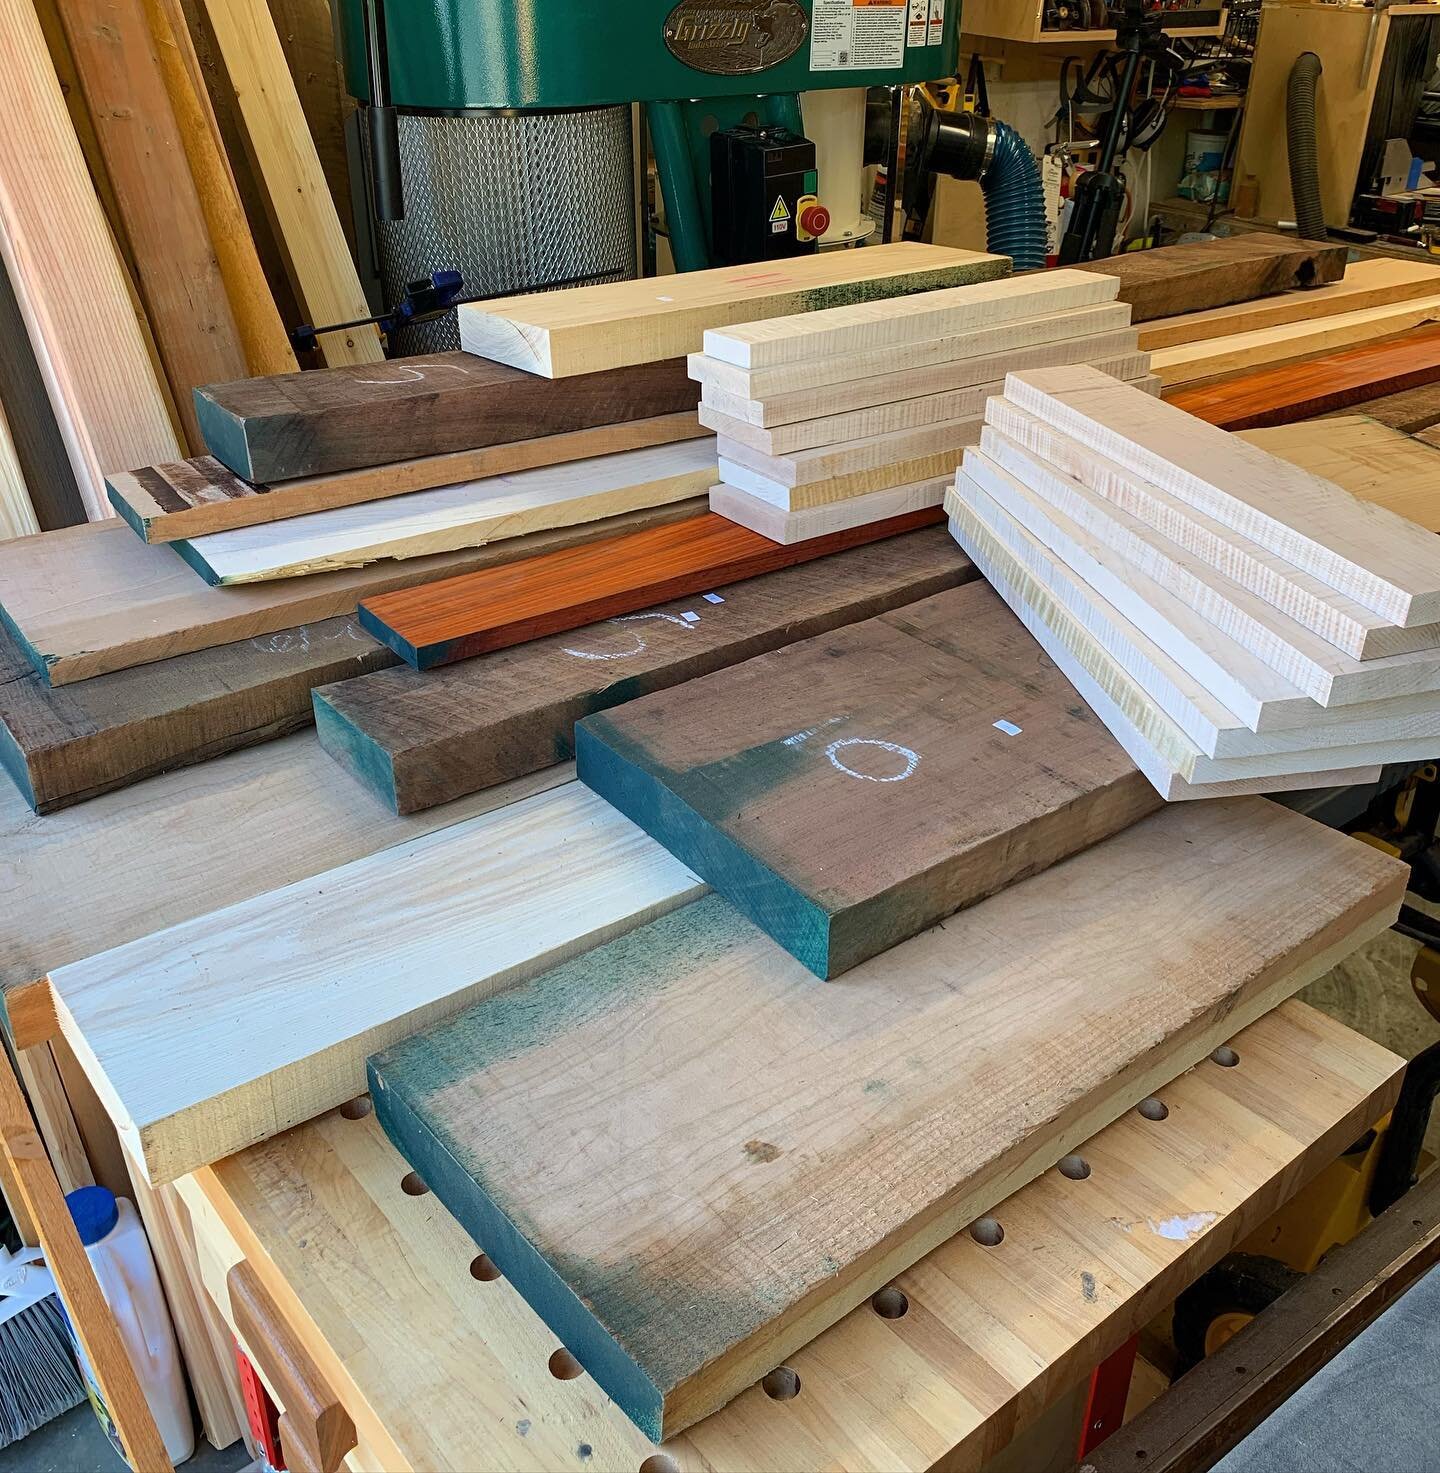 Needed to make a lumber run for some 8/4 stock. Ended up getting just over 100 BF of hardwood goodness. Now it&rsquo;s milling time!